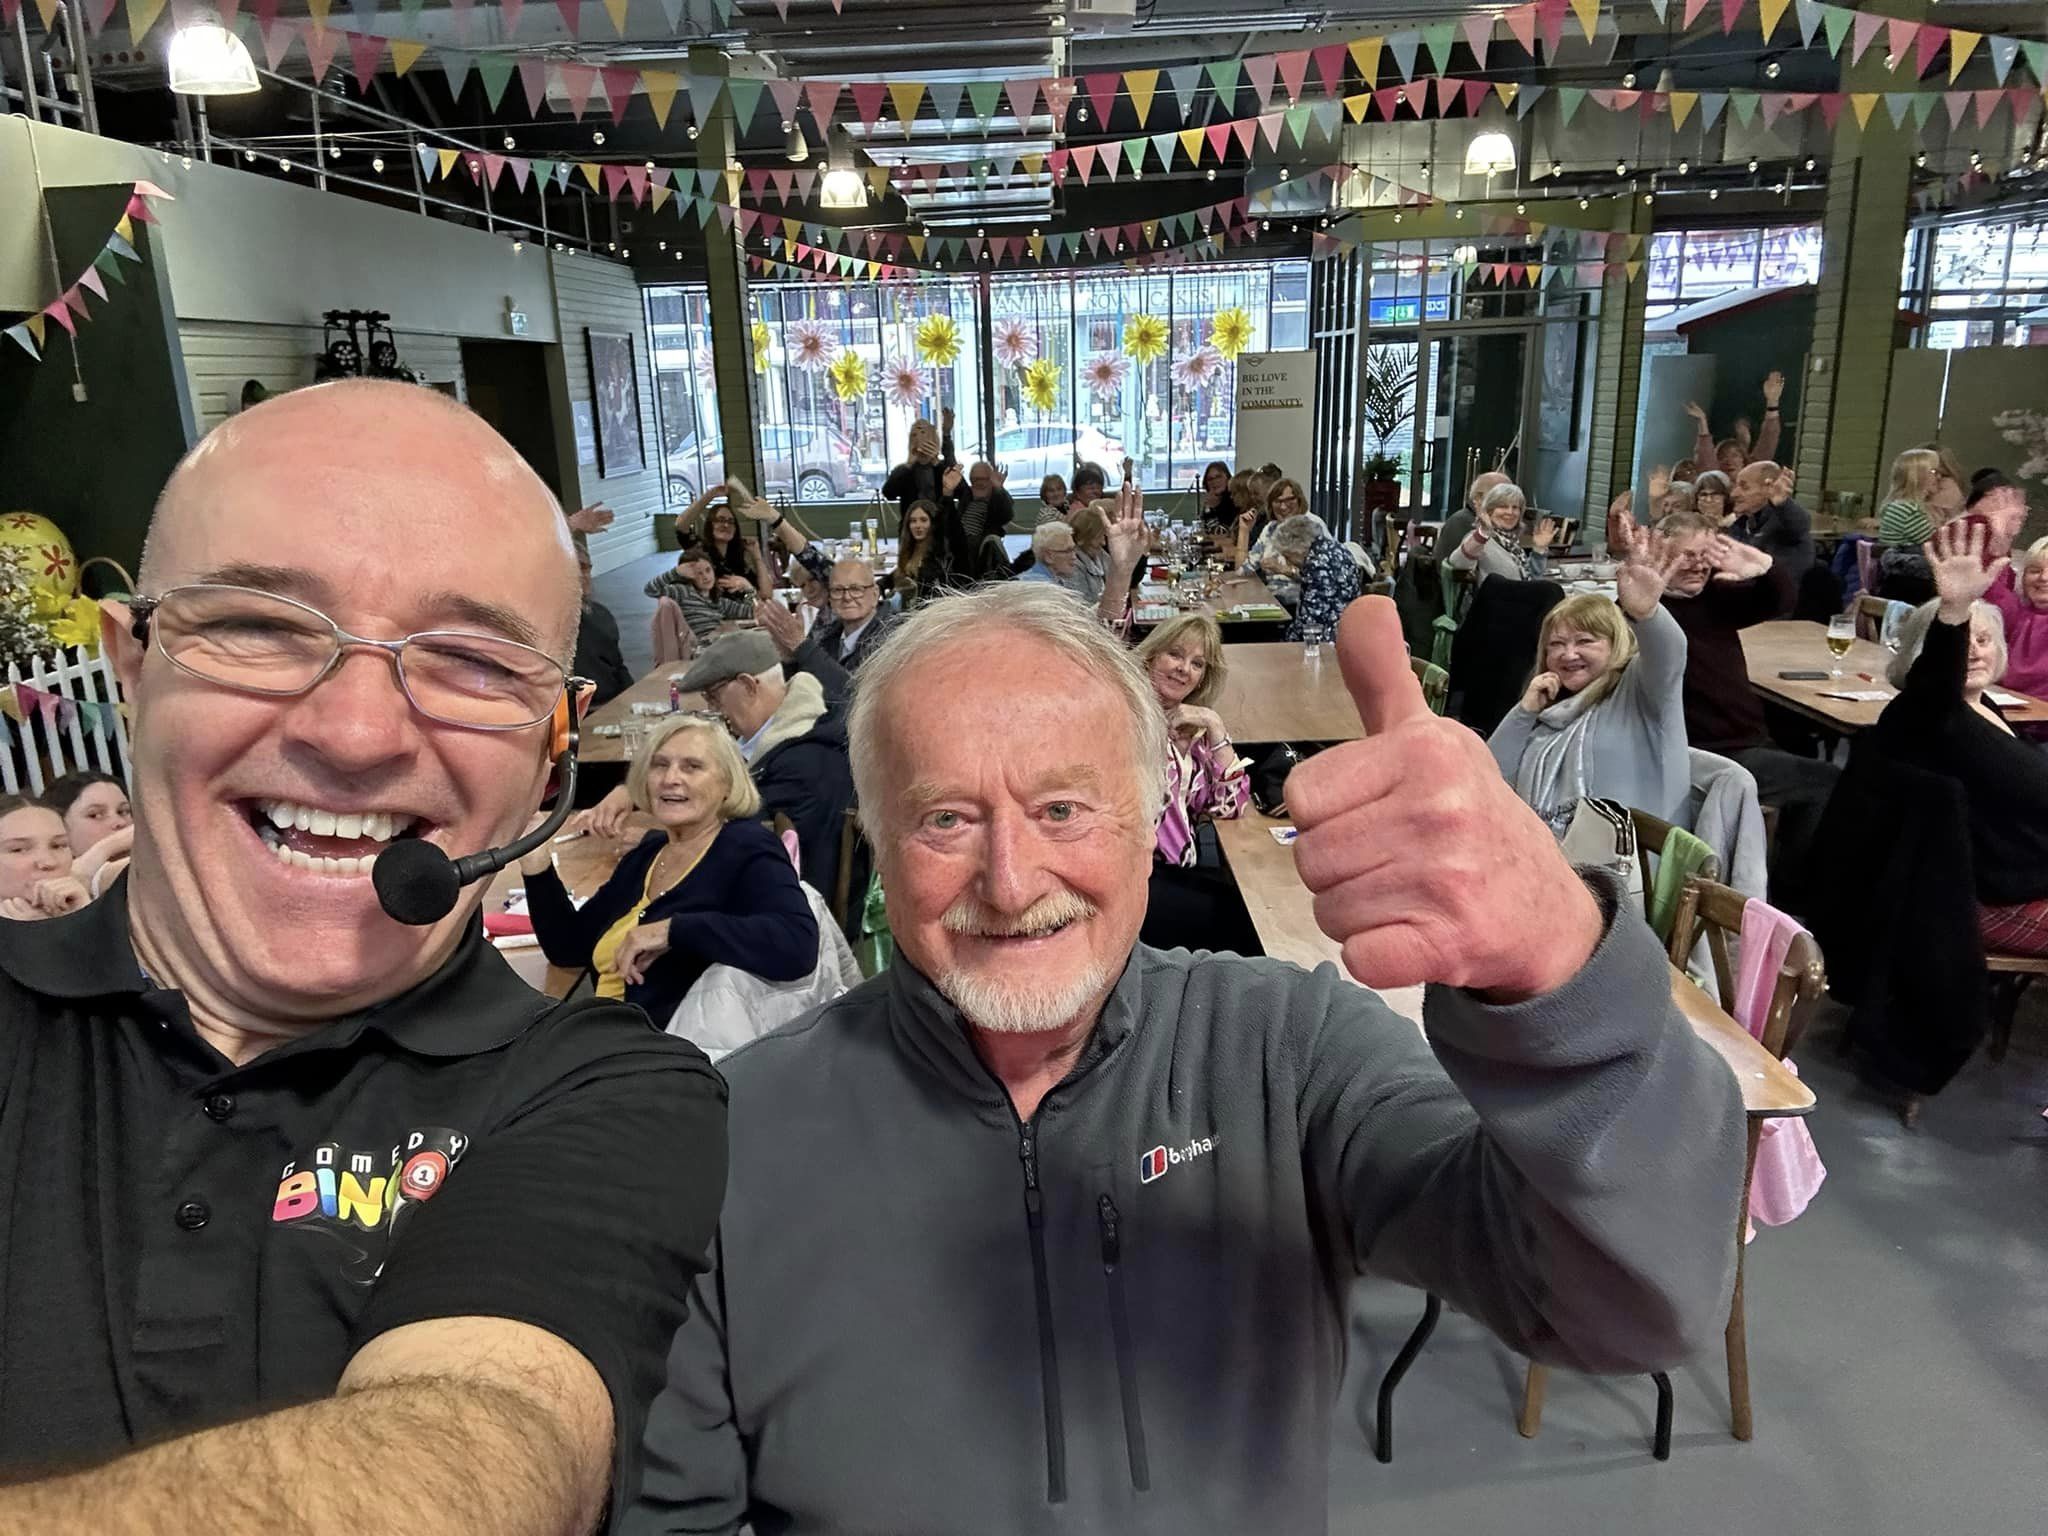 The third Comedy Bingo Spring Social at Southport Market was a huge success, with another great turnout and lots of prizes being won! The event was sponsored by Halliwell Jones MINI Southport